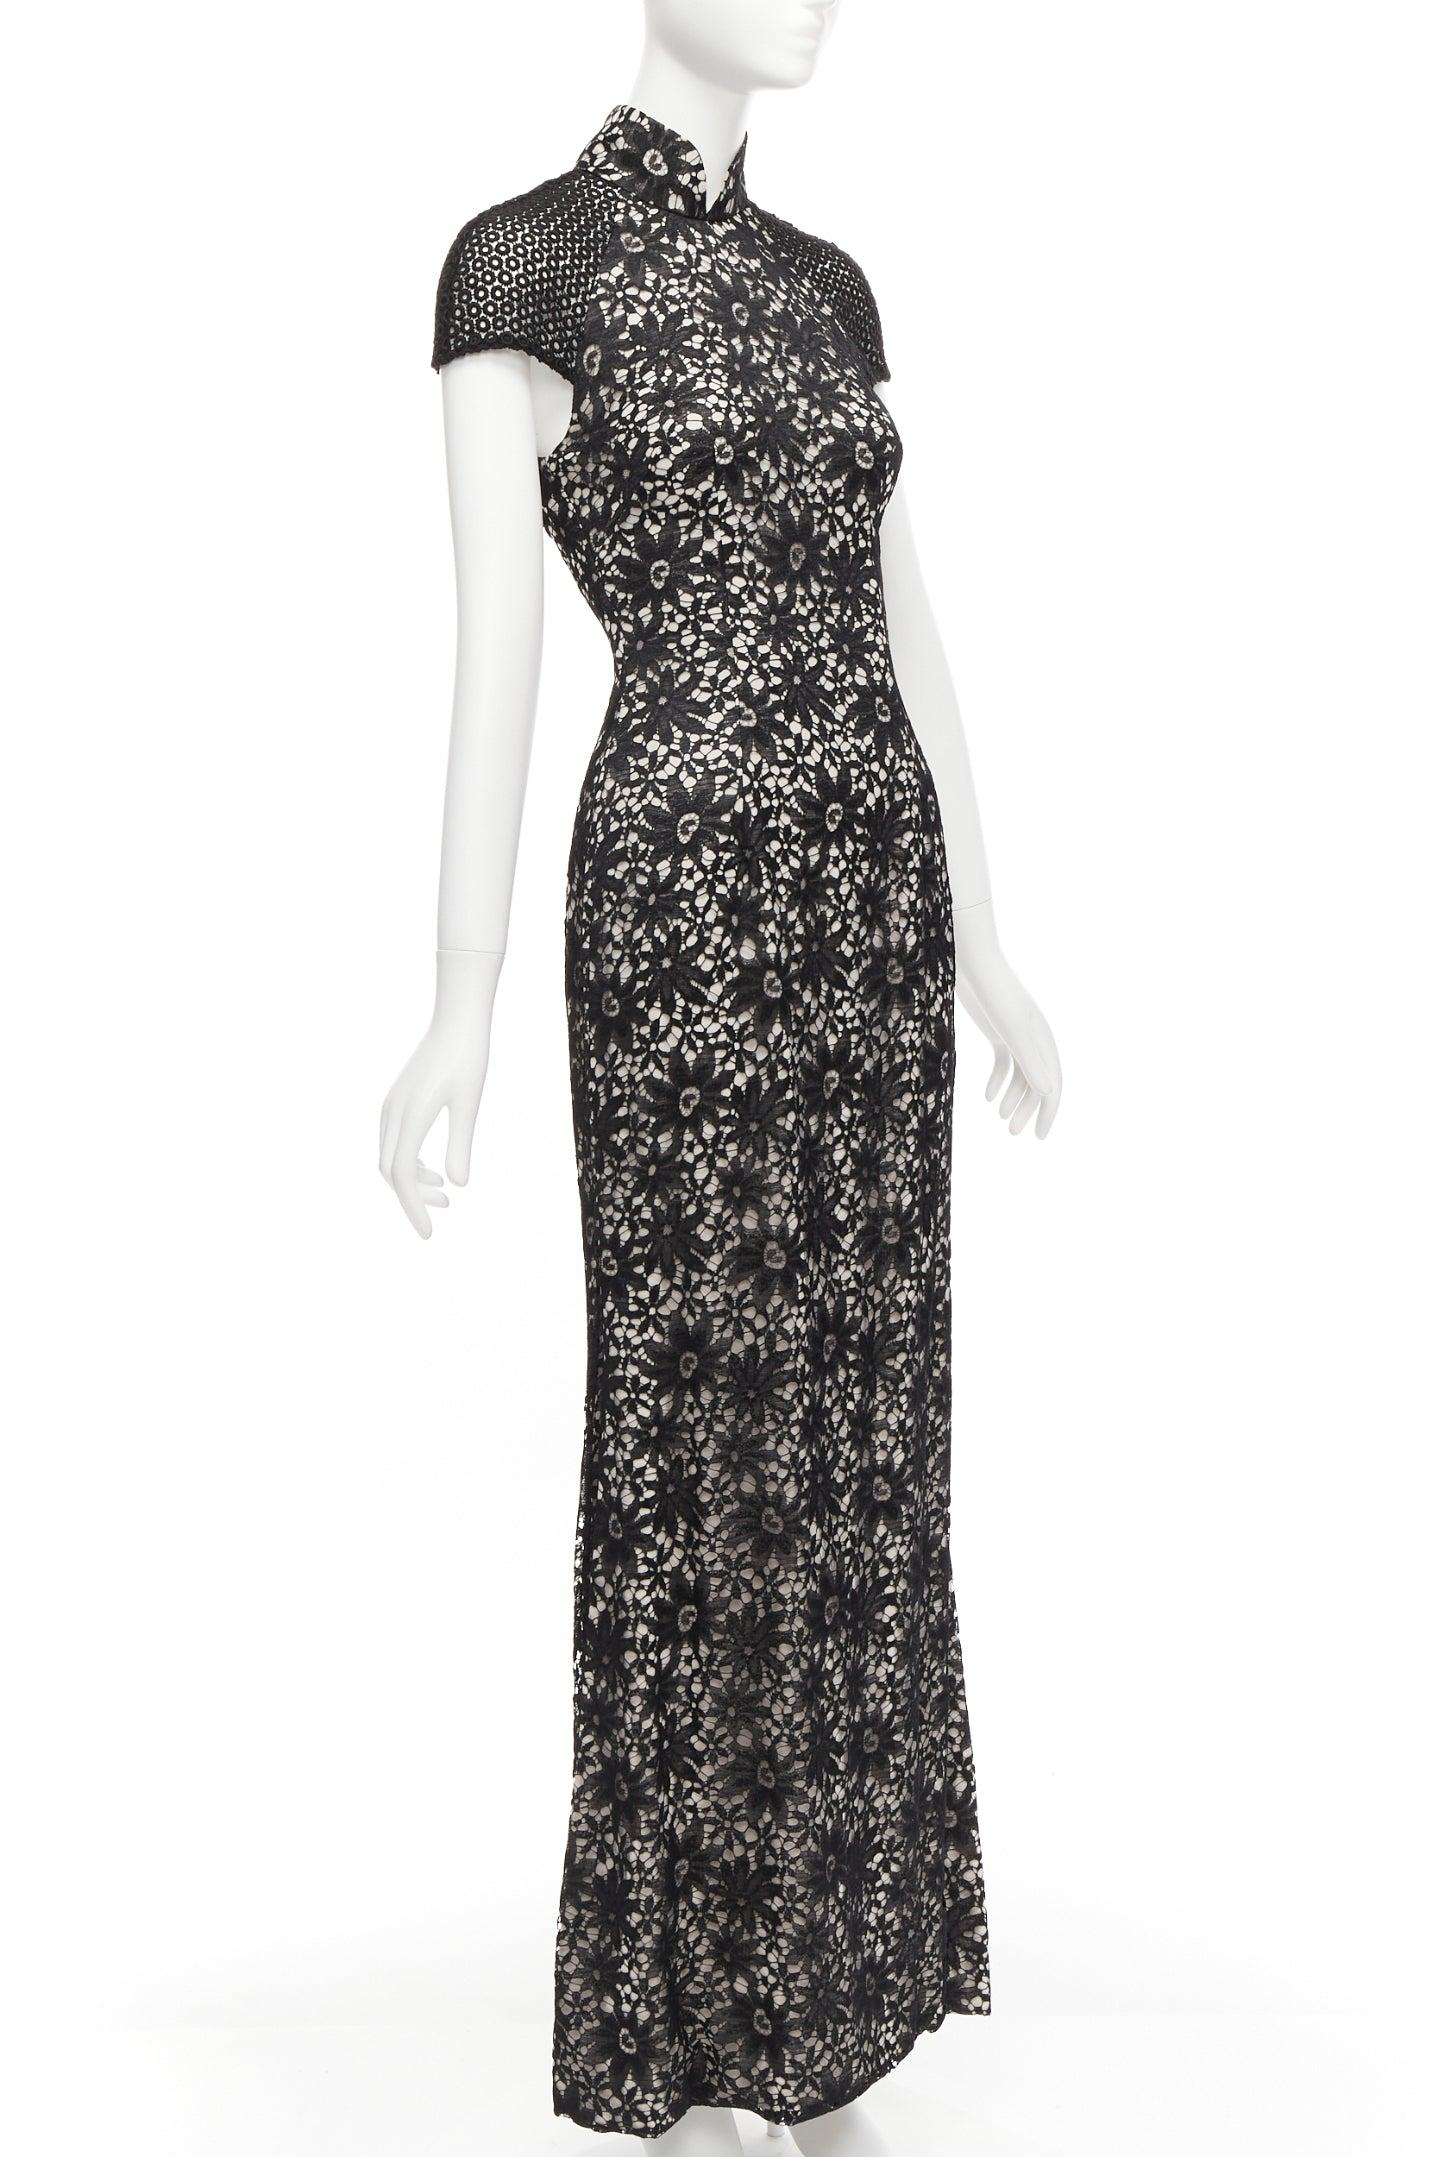 SHANGHAI TANG black beige floral lace overlay Qipao collar midi dress S
Reference: CELG/A00377
Brand: Shanghai Tang
Material: Fabric
Color: Black, Nude
Pattern: Lace
Closure: Zip
Lining: Nude Silk
Extra Details: back zip. Lined except shoulder which